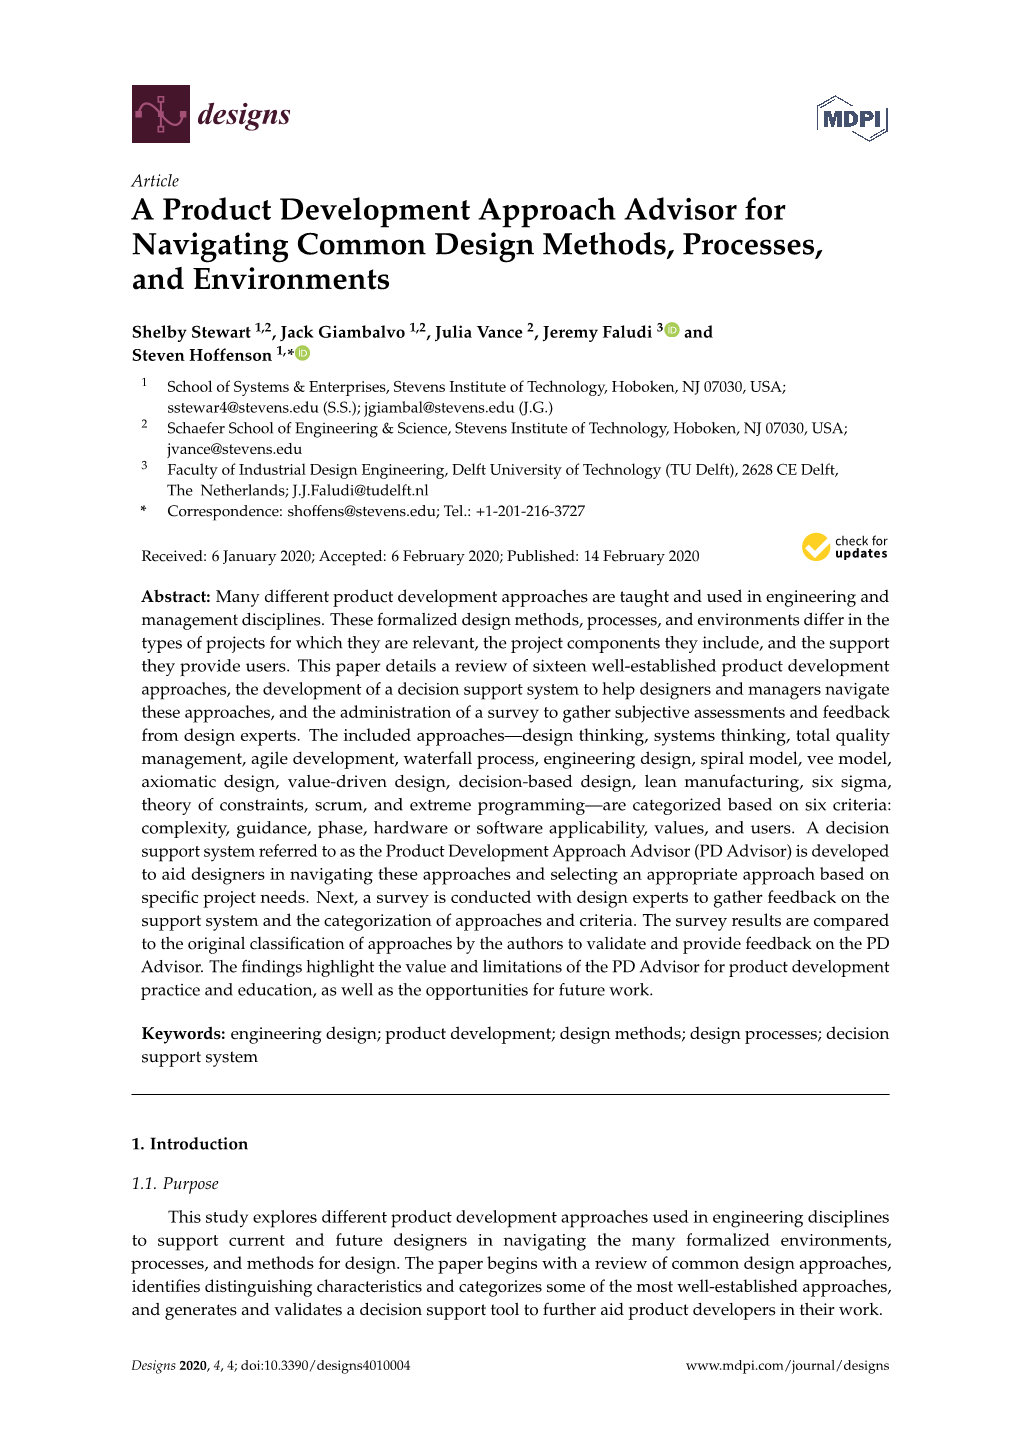 A Product Development Approach Advisor for Navigating Common Design Methods, Processes, and Environments